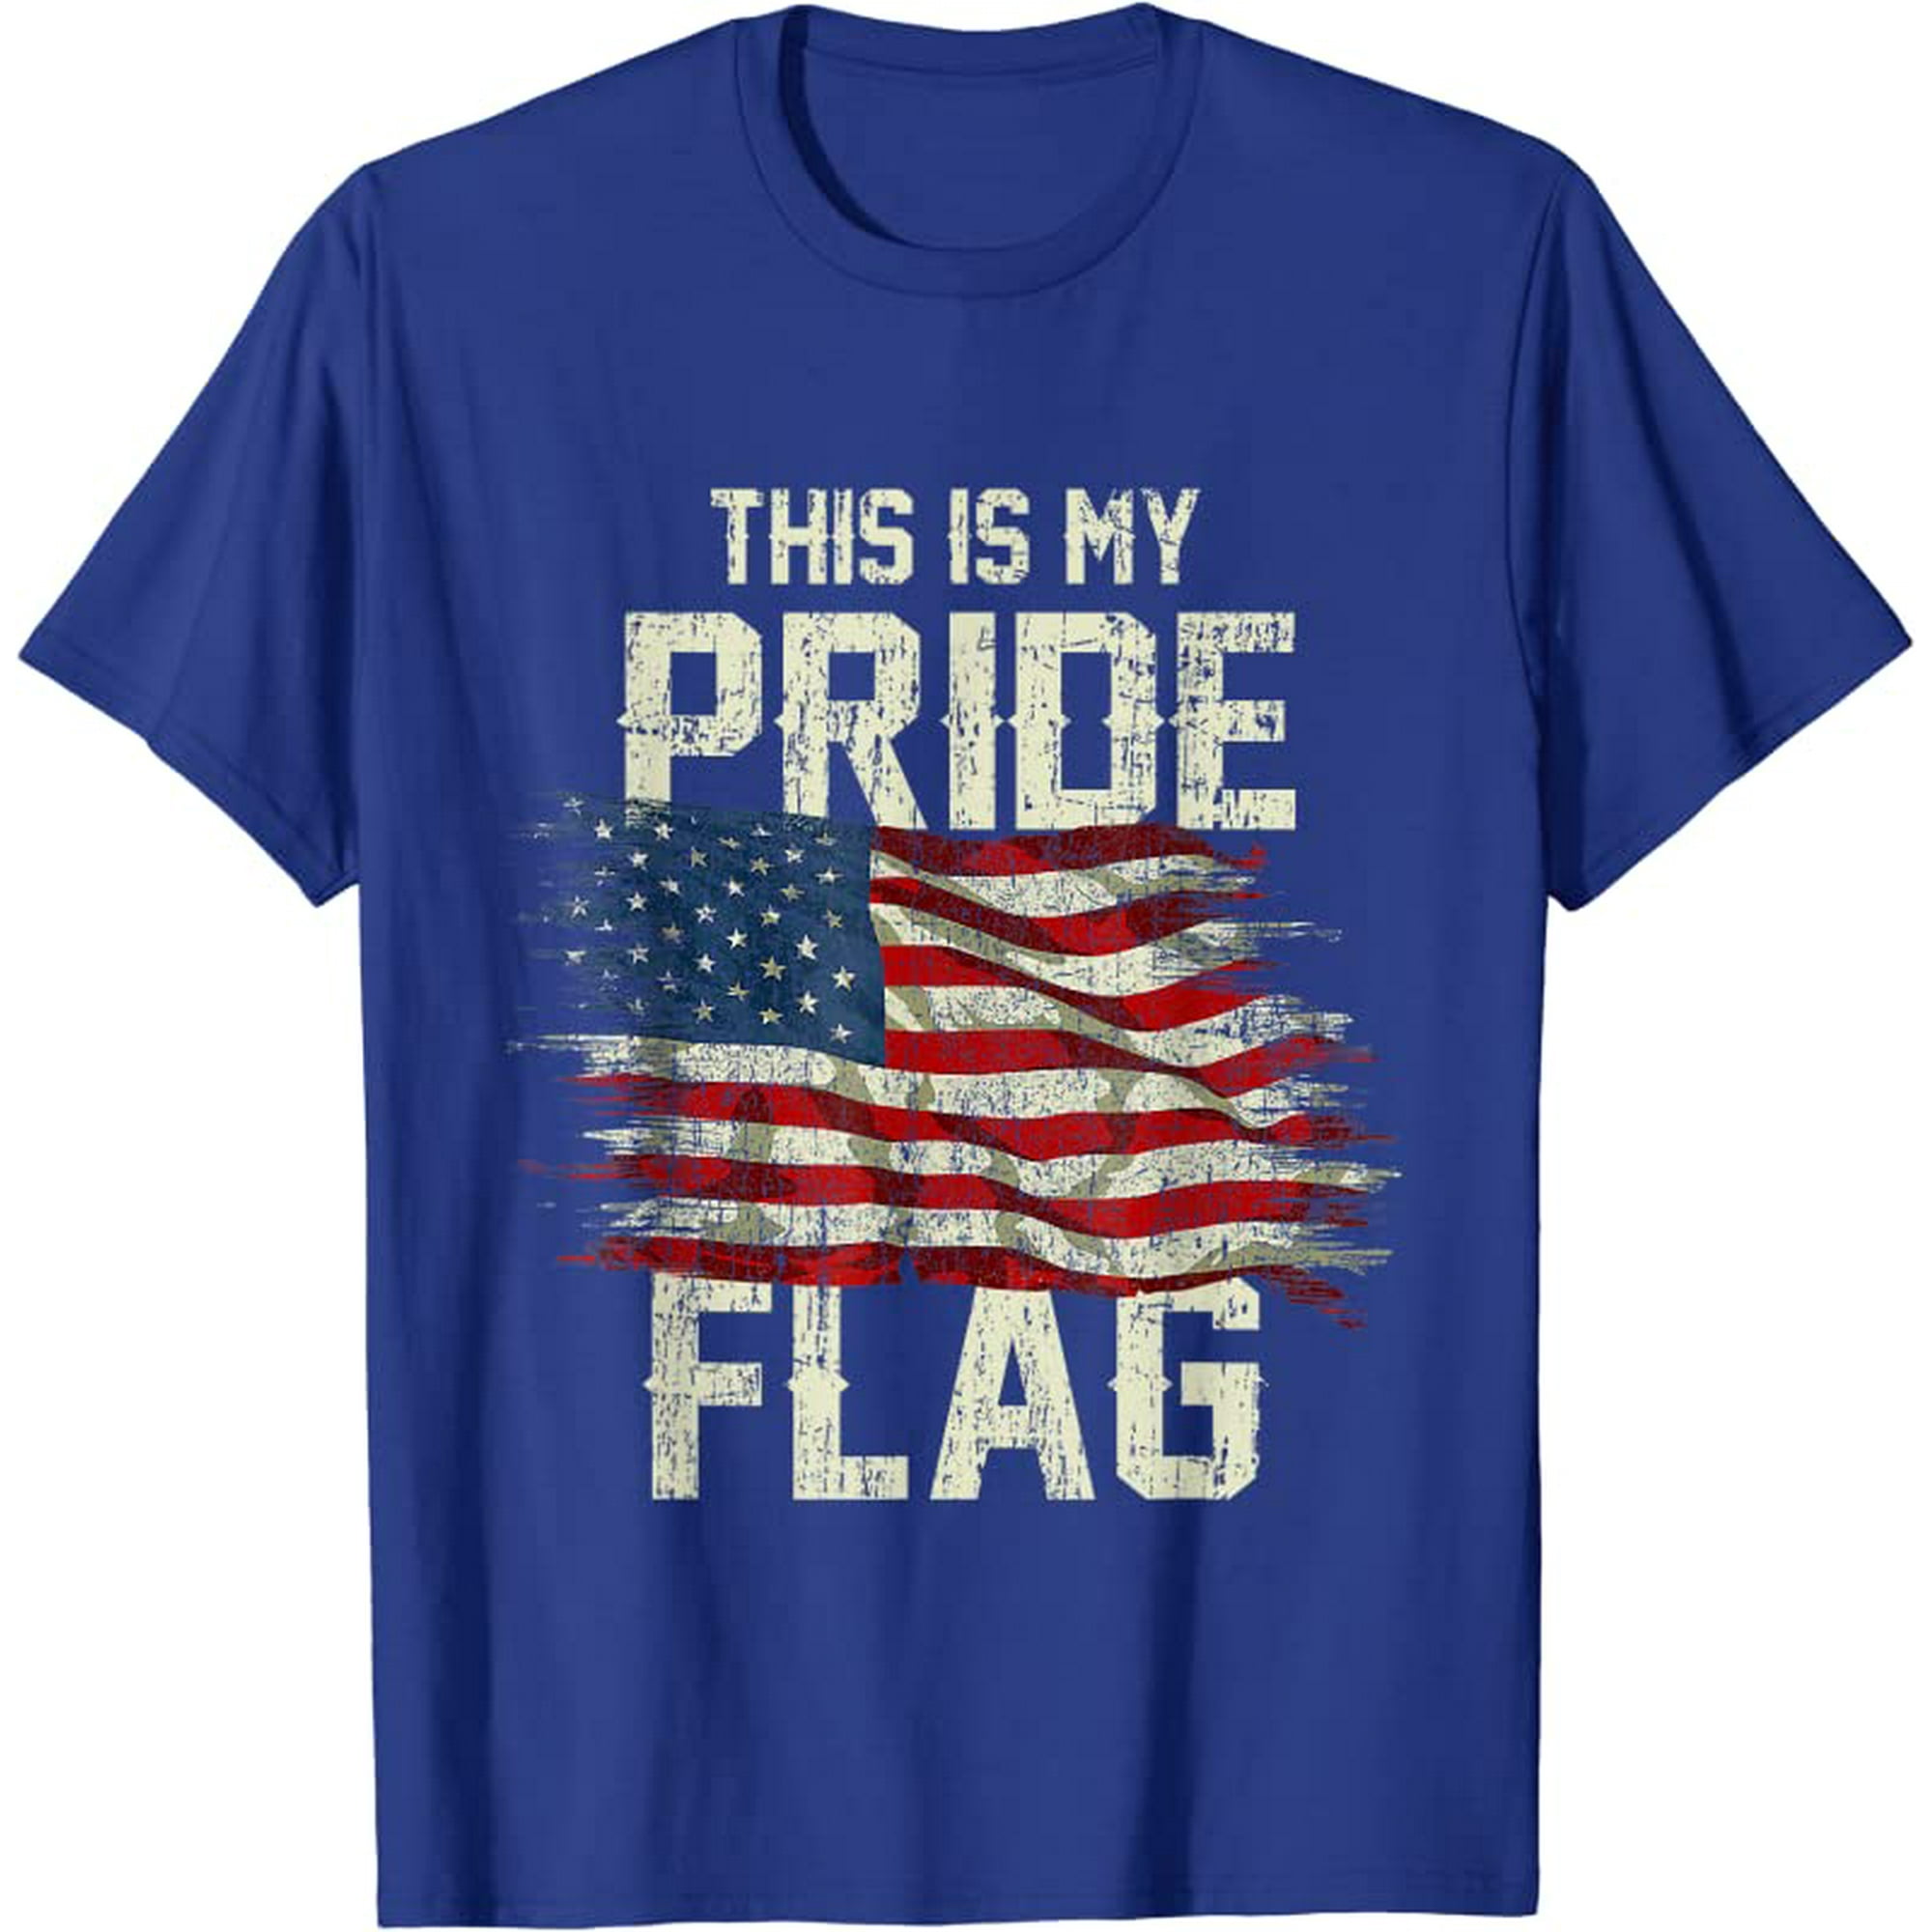 This Is My Pride Flag USA American 4th of July Patriotic T-Shirt